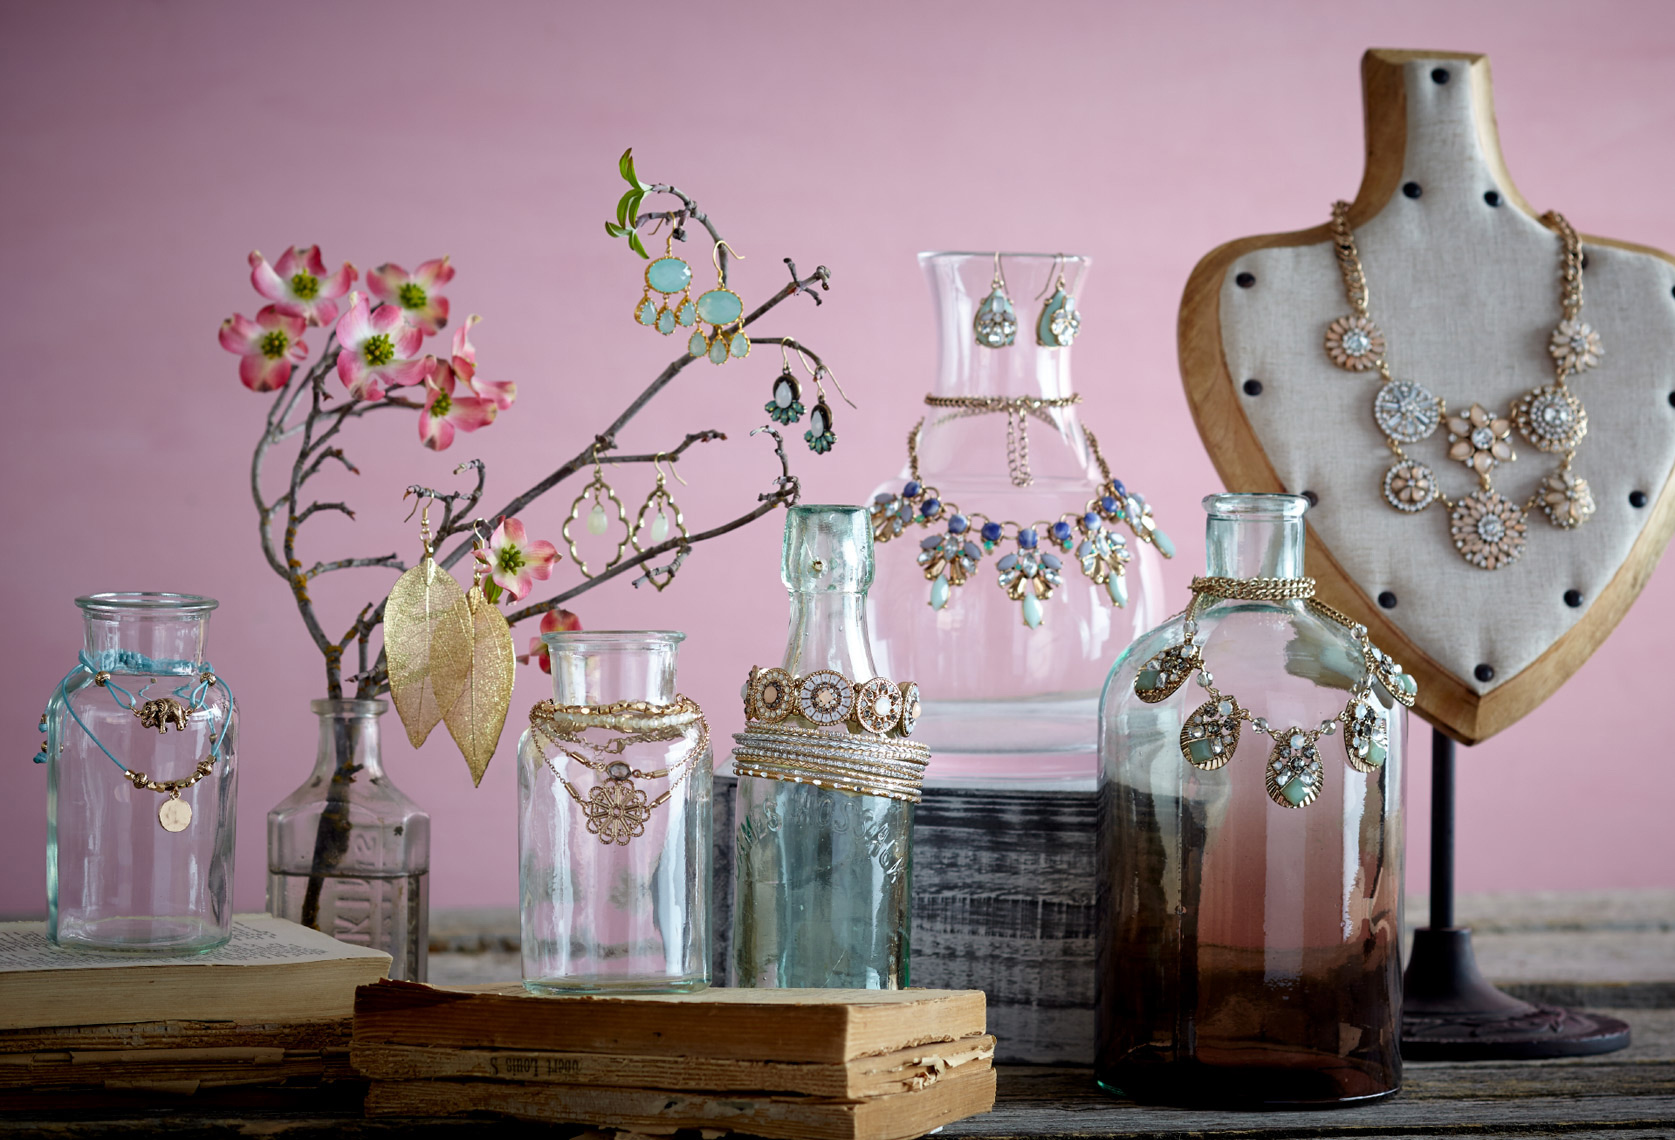 teal and peach jewelry hanging on vases with flowers and pink background San Francisco product photographer